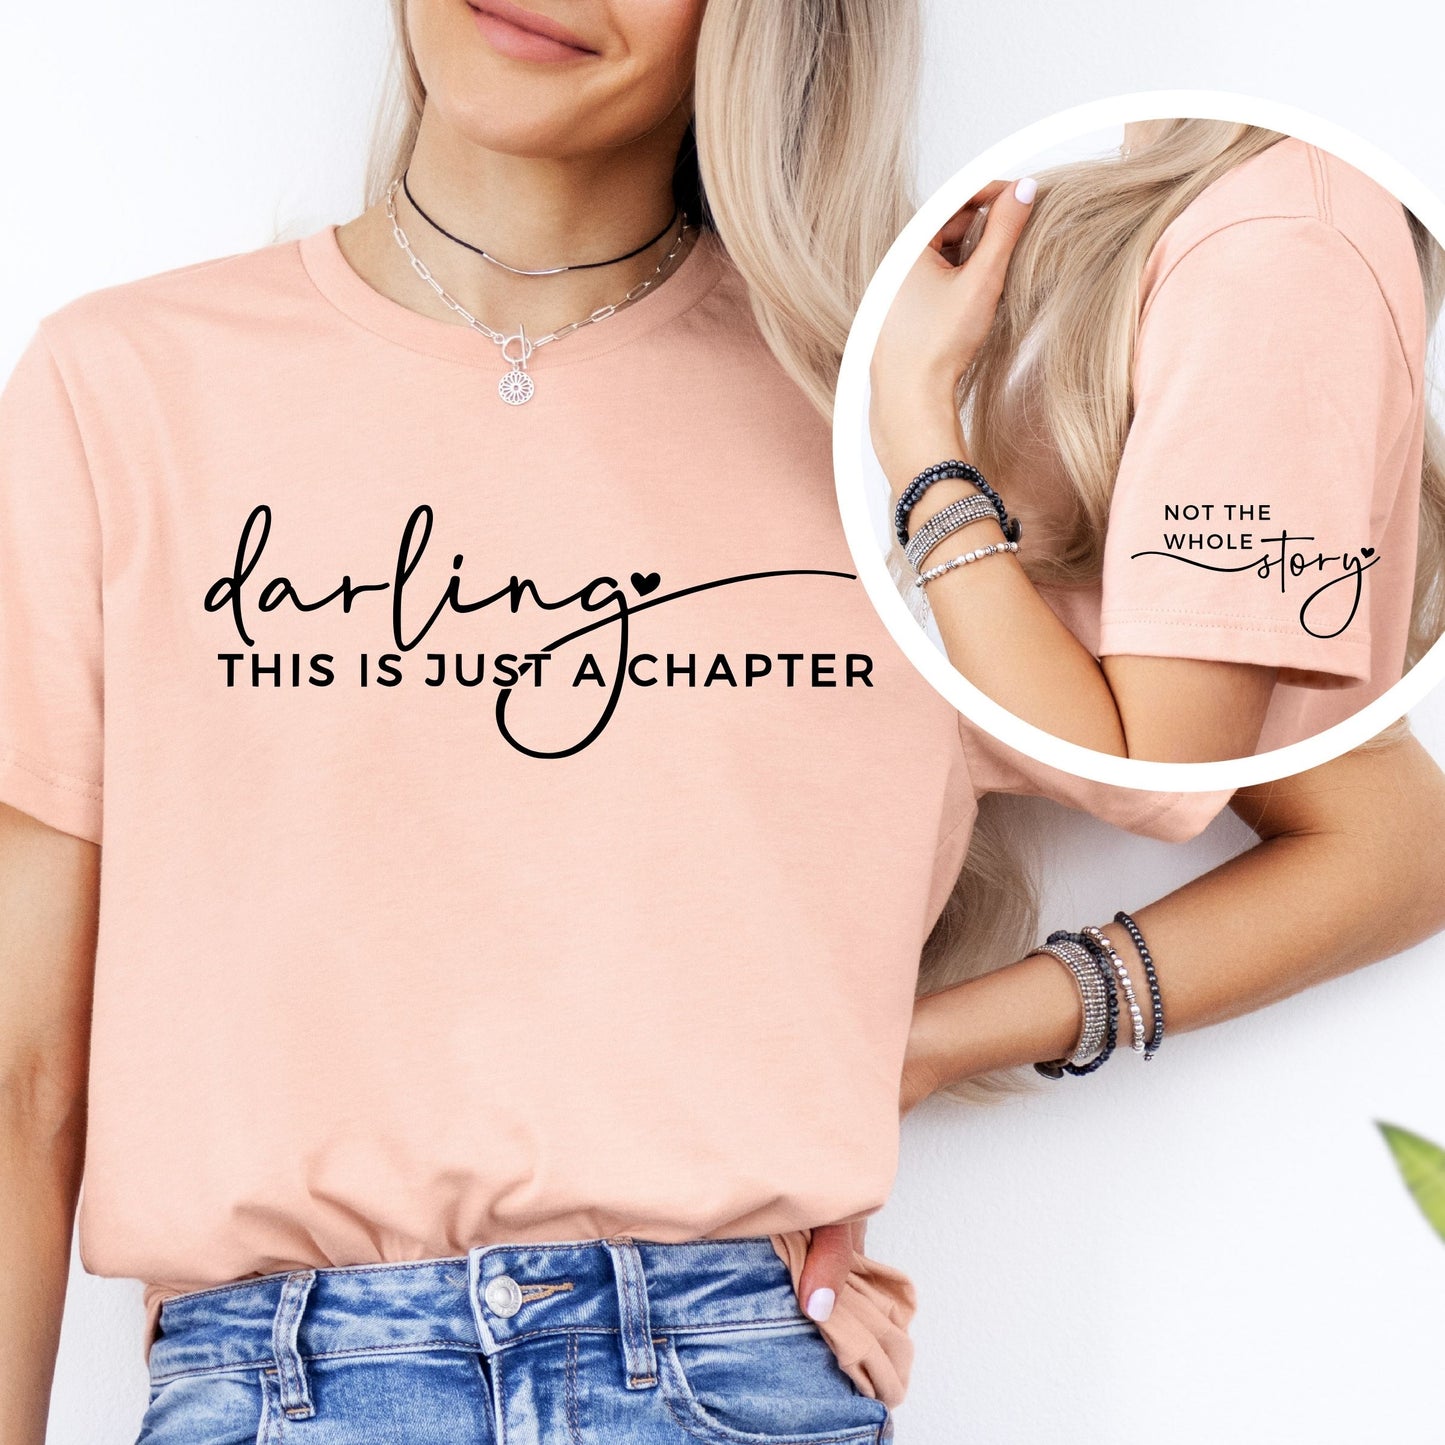 Darling This Is Just A Chapter T-Shirt - Mardonyx T-Shirt XS / Heather Peach